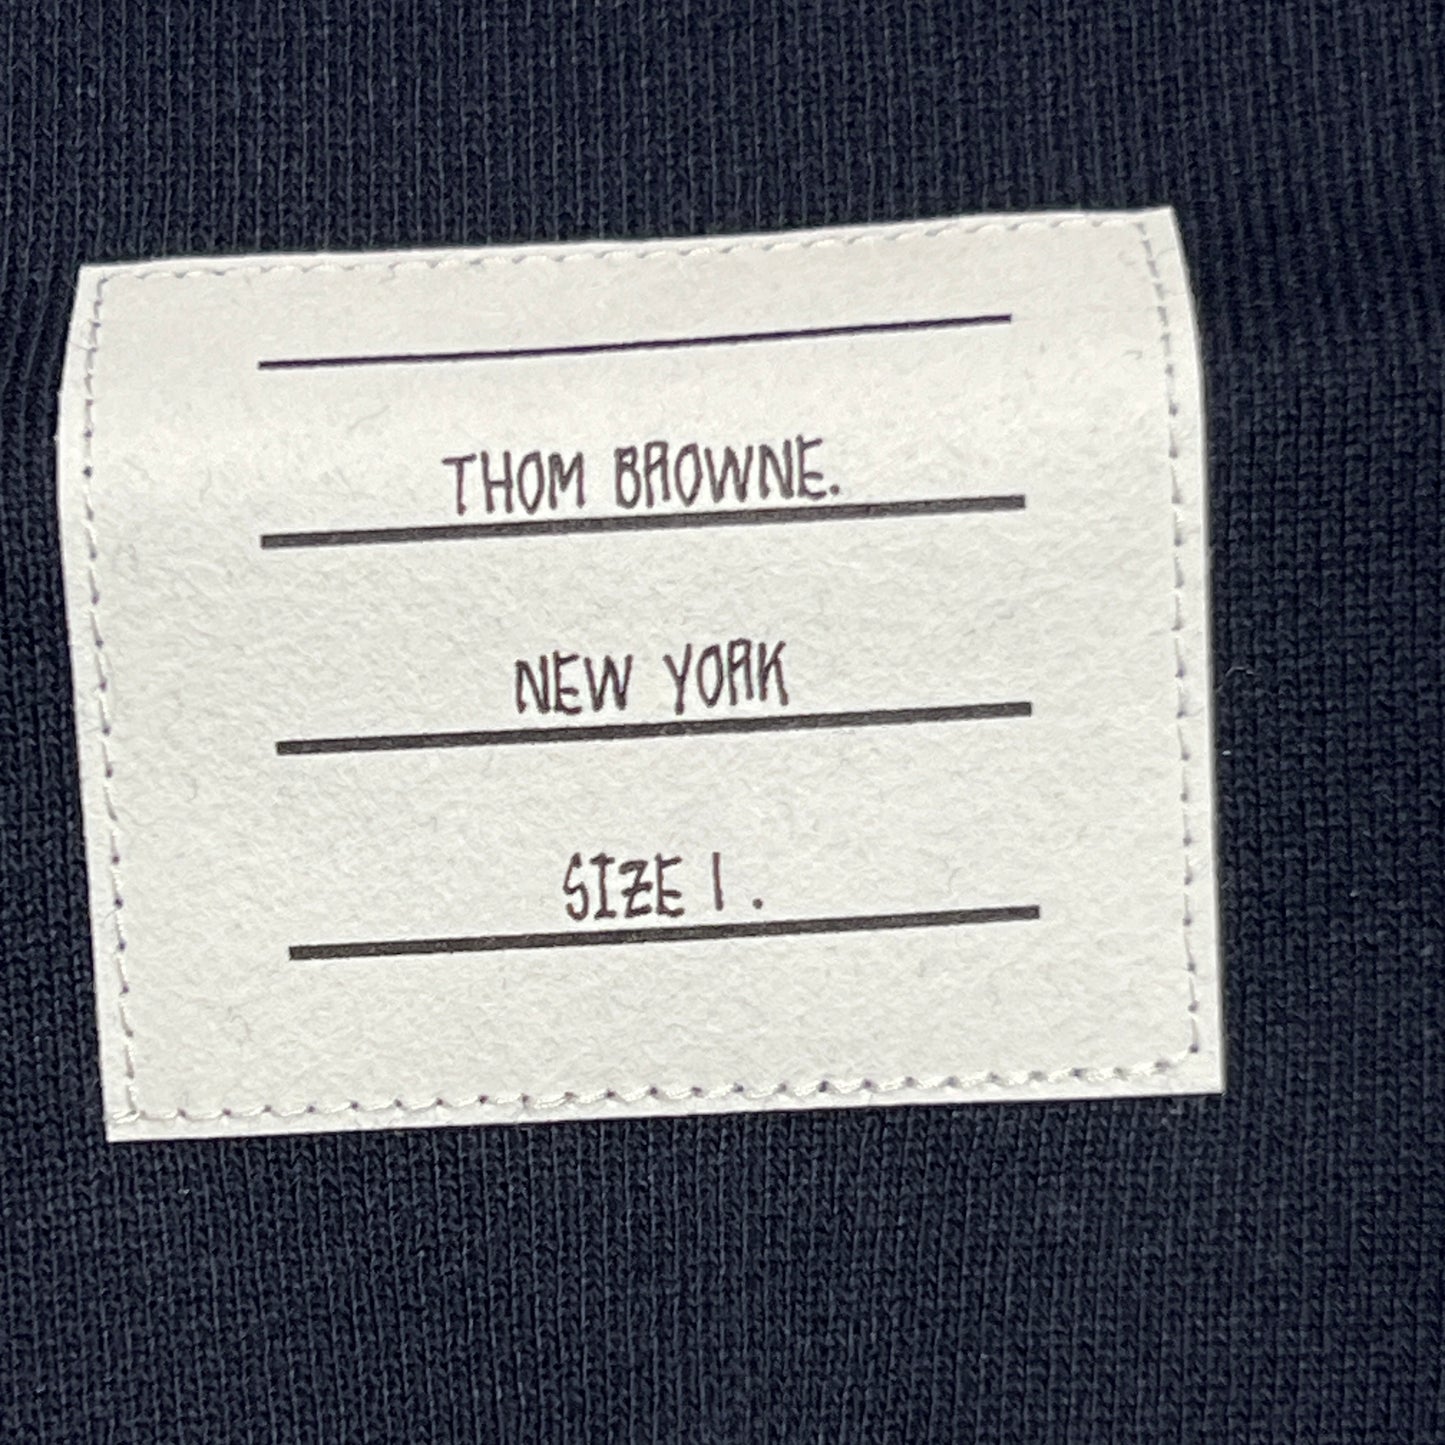 THOM BROWNE Classic Sweat pants w/Engineered 4 Bar Loop Back Navy Size 1 (New)